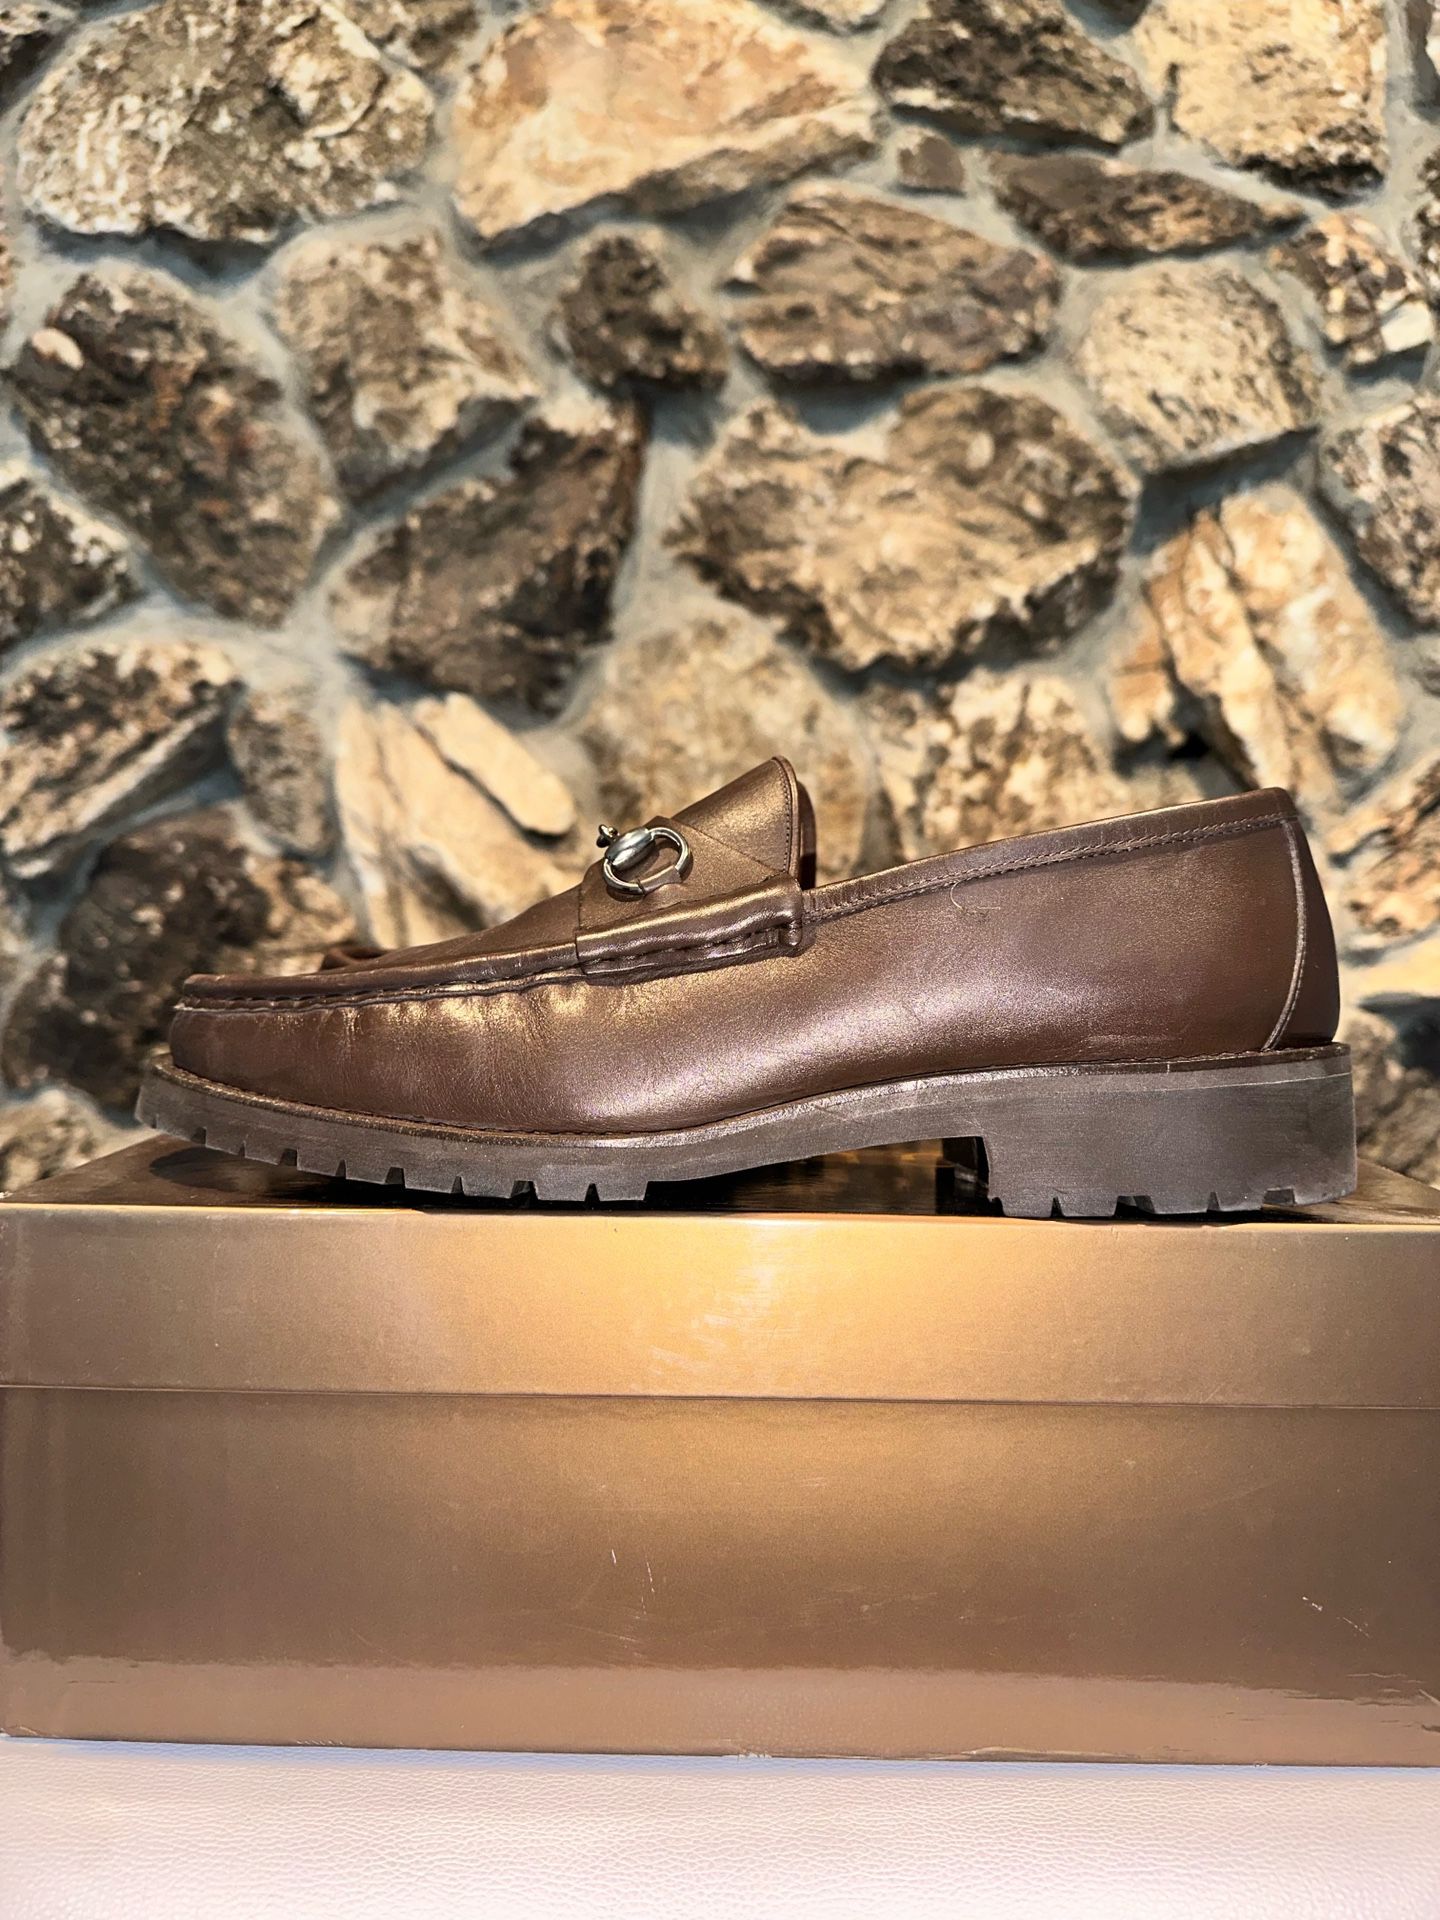 Gucci Horsebit Brown Leather Loafers Size 11.5